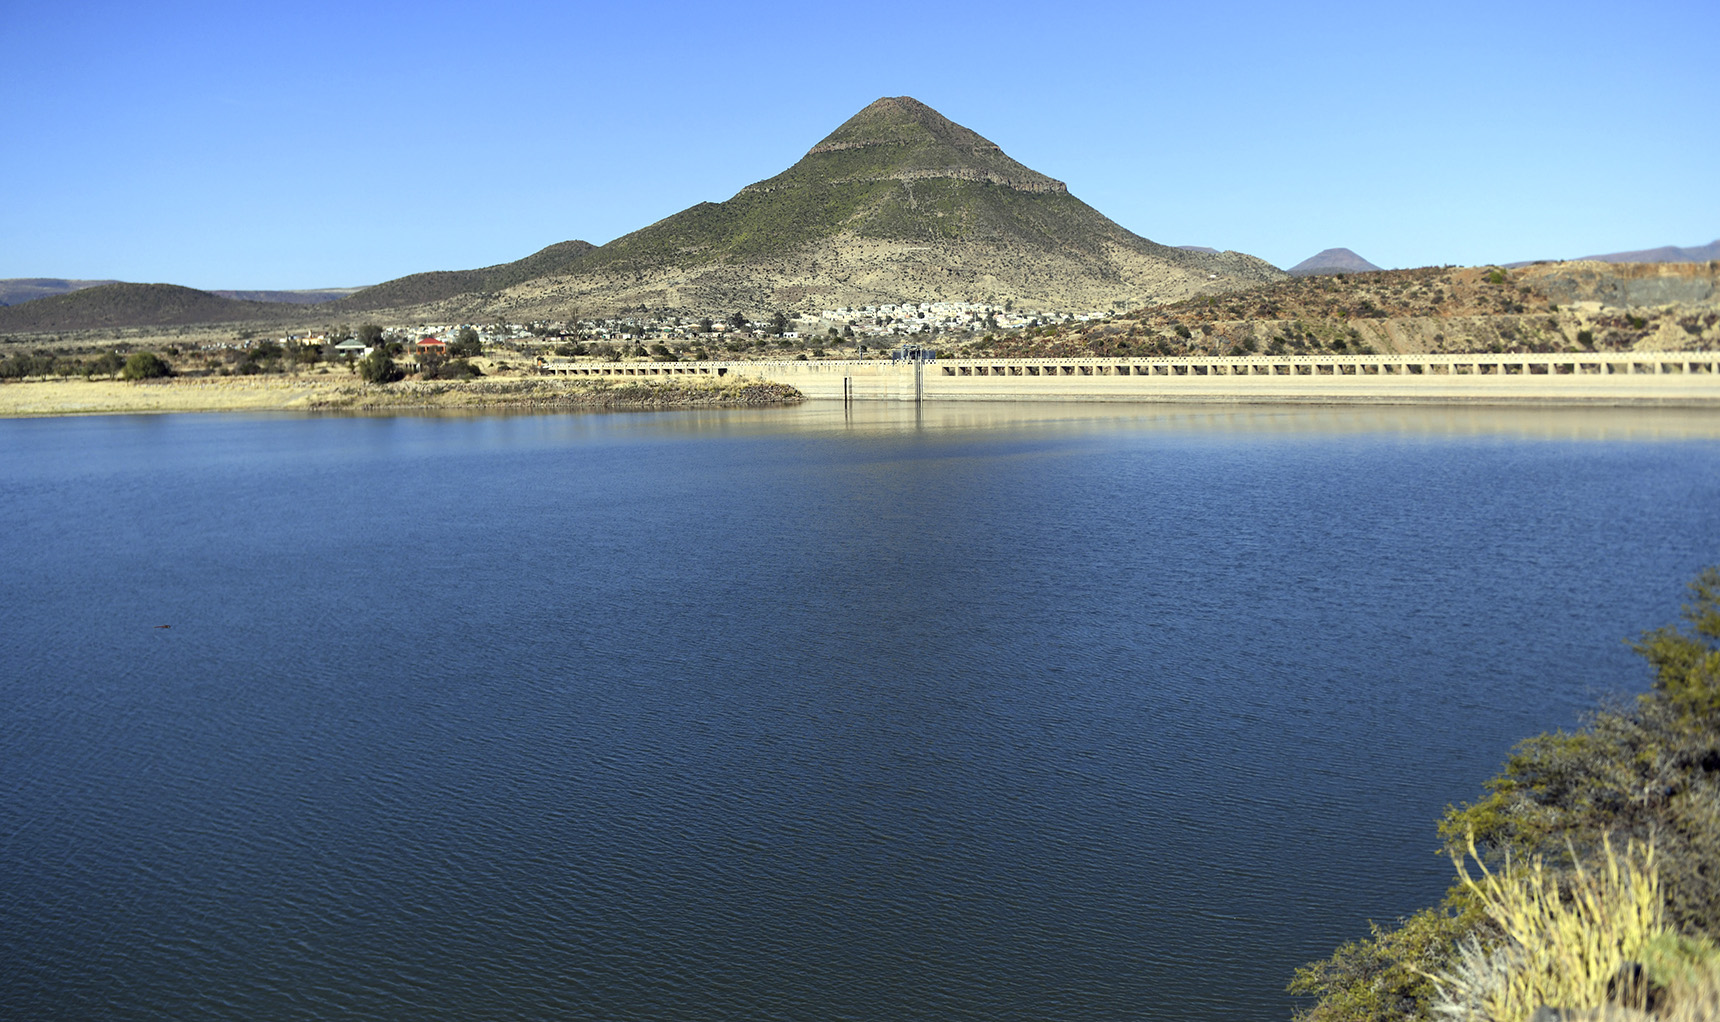 No water, No information: The plight of a Graaff-Reinet community